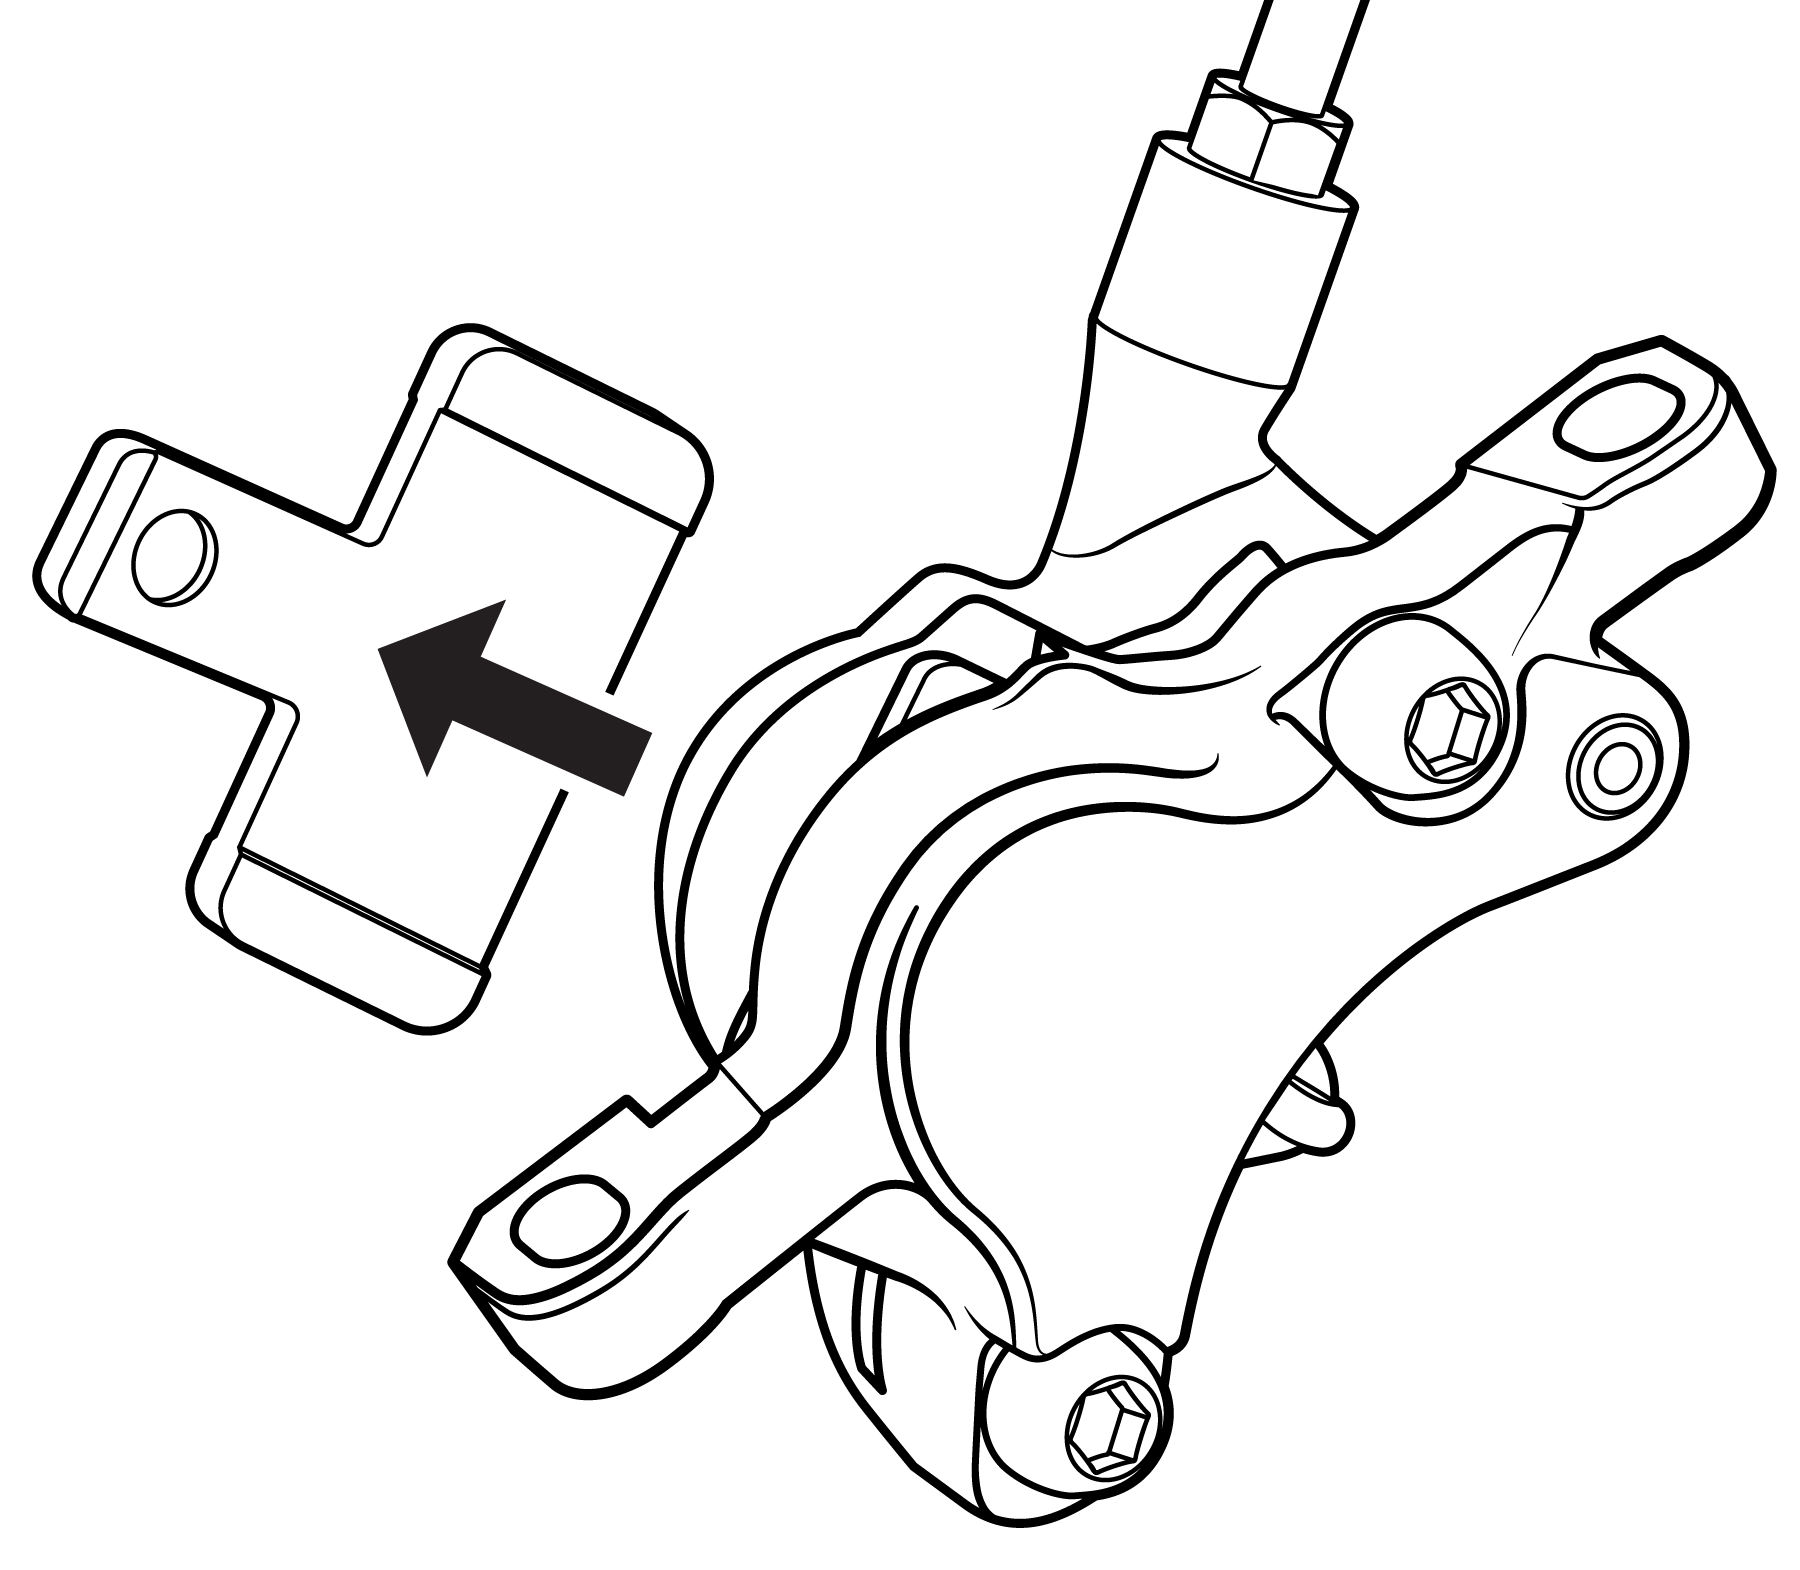 Caliper_Spacer_fig1.png